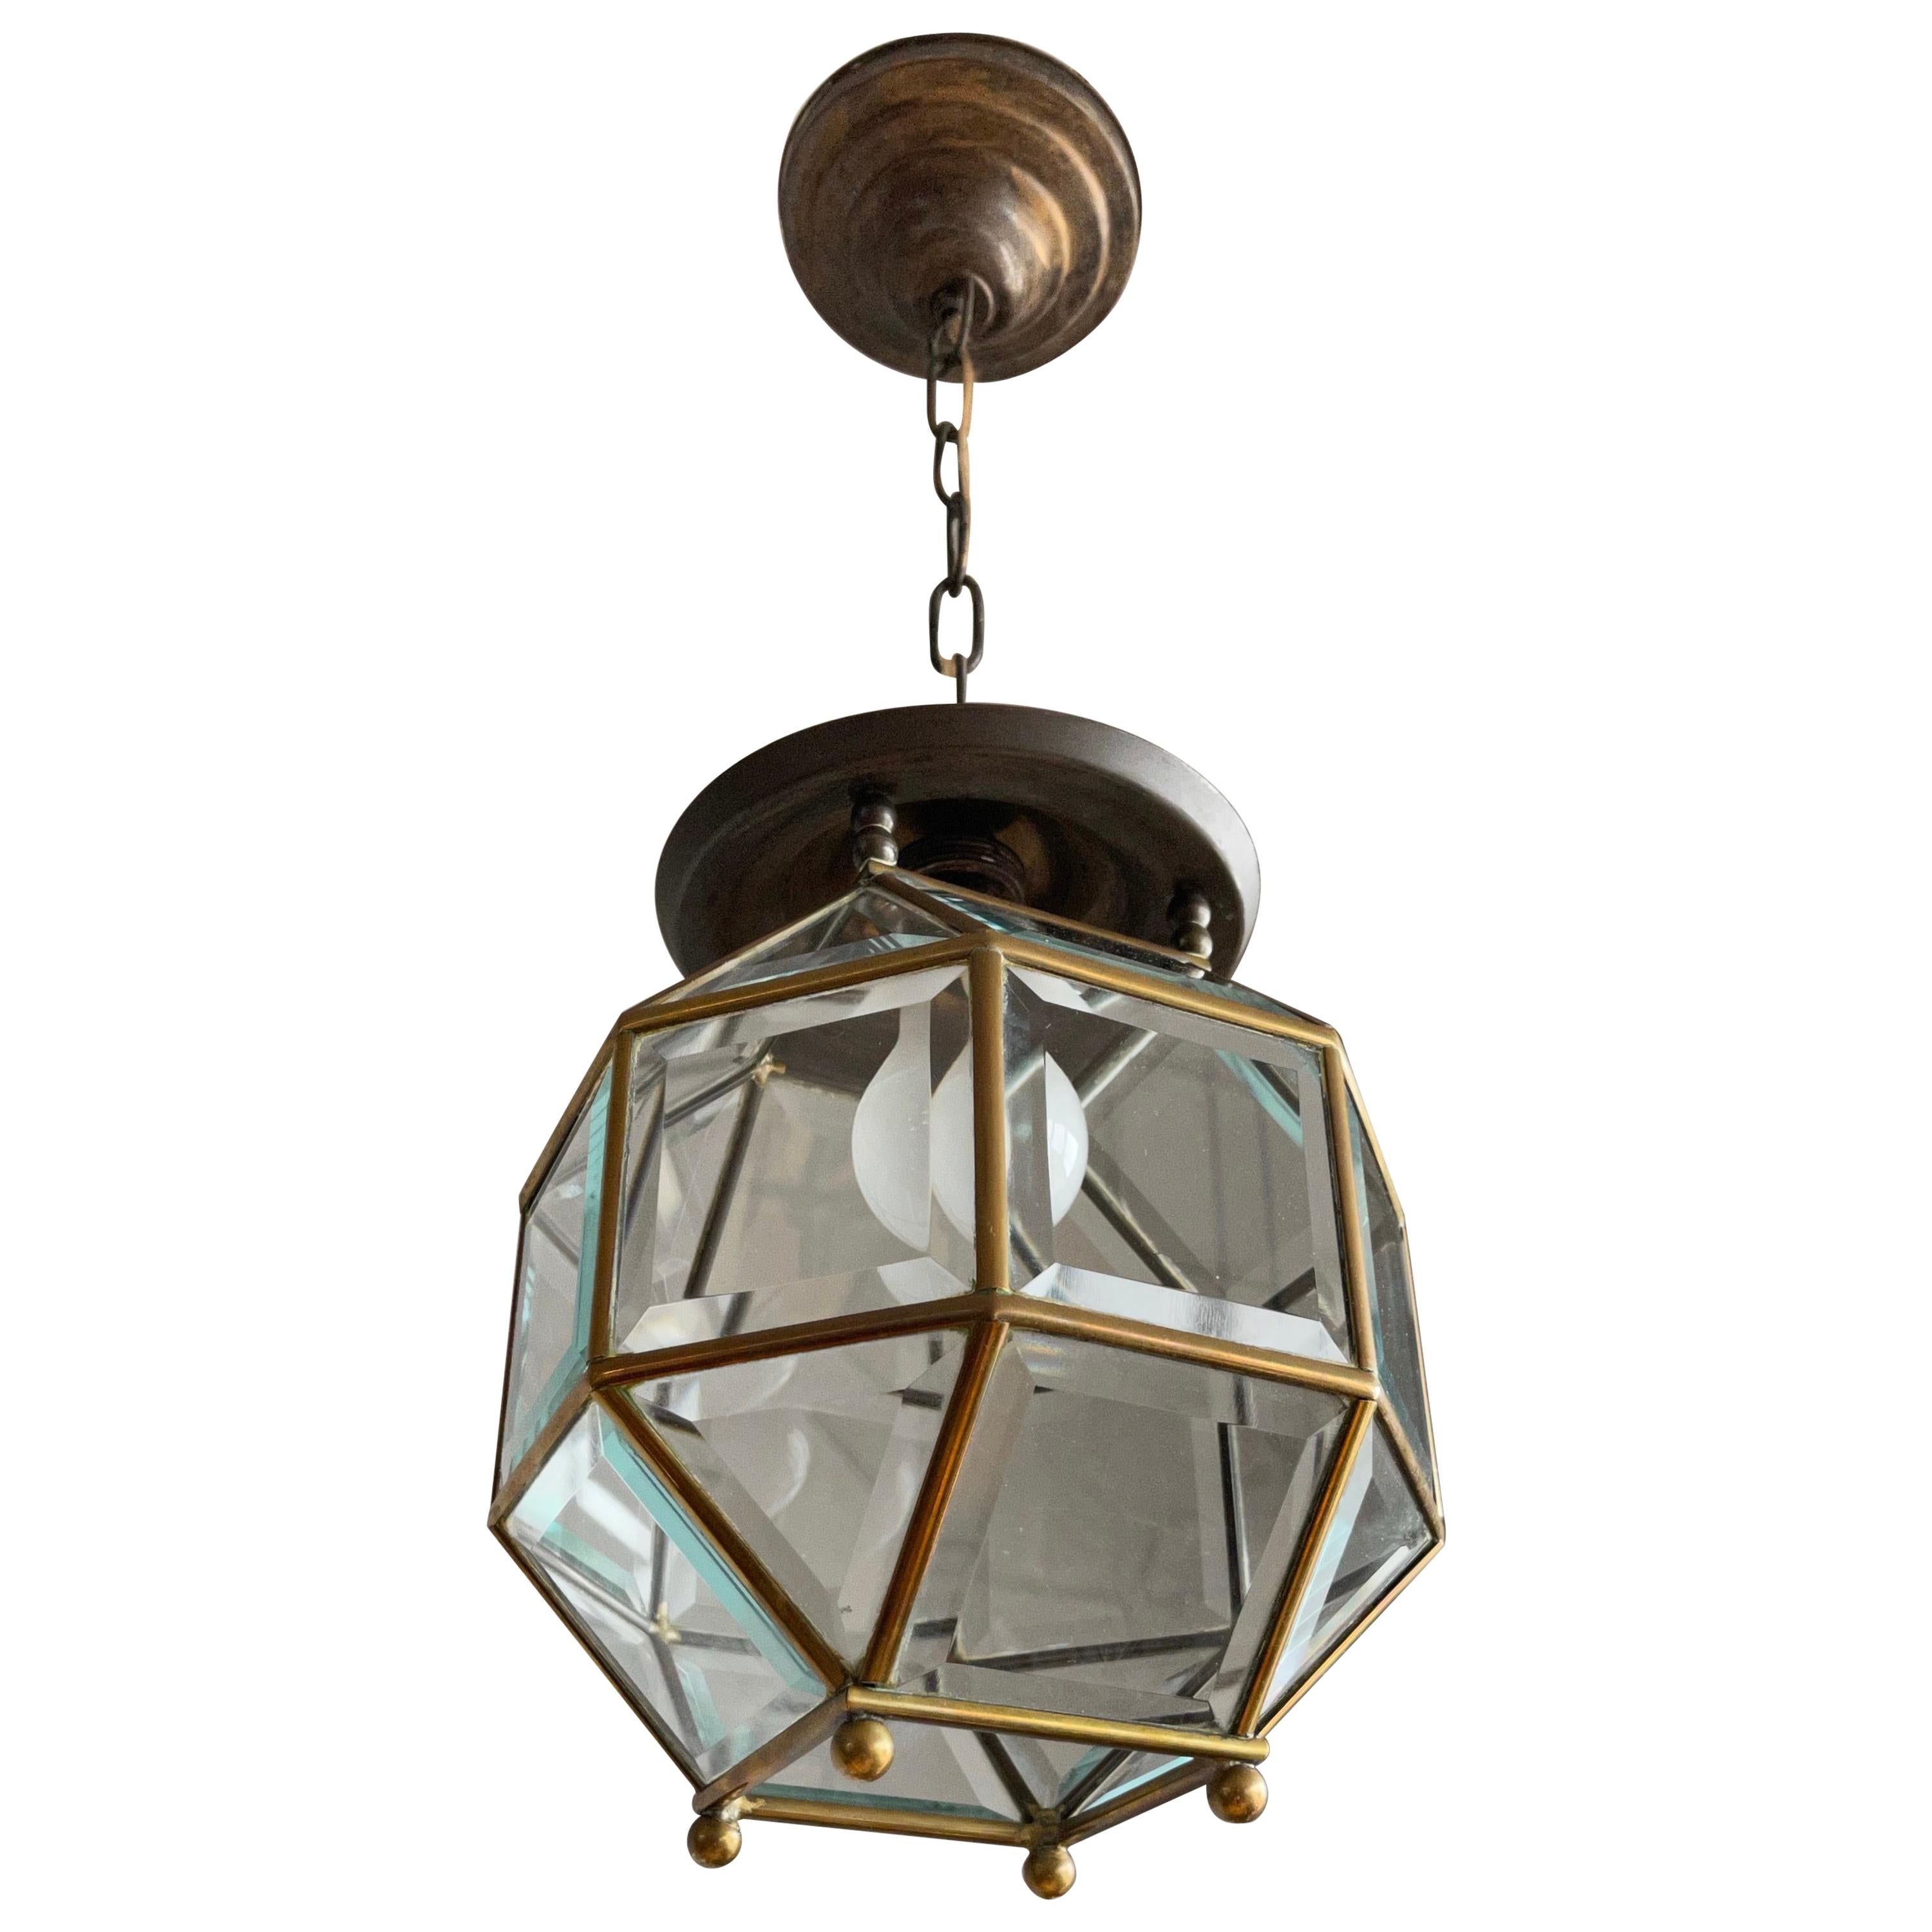 Early 1900s Beveled Glass and Brass Pendant Cubic Adolf Loos Style Ceiling Light